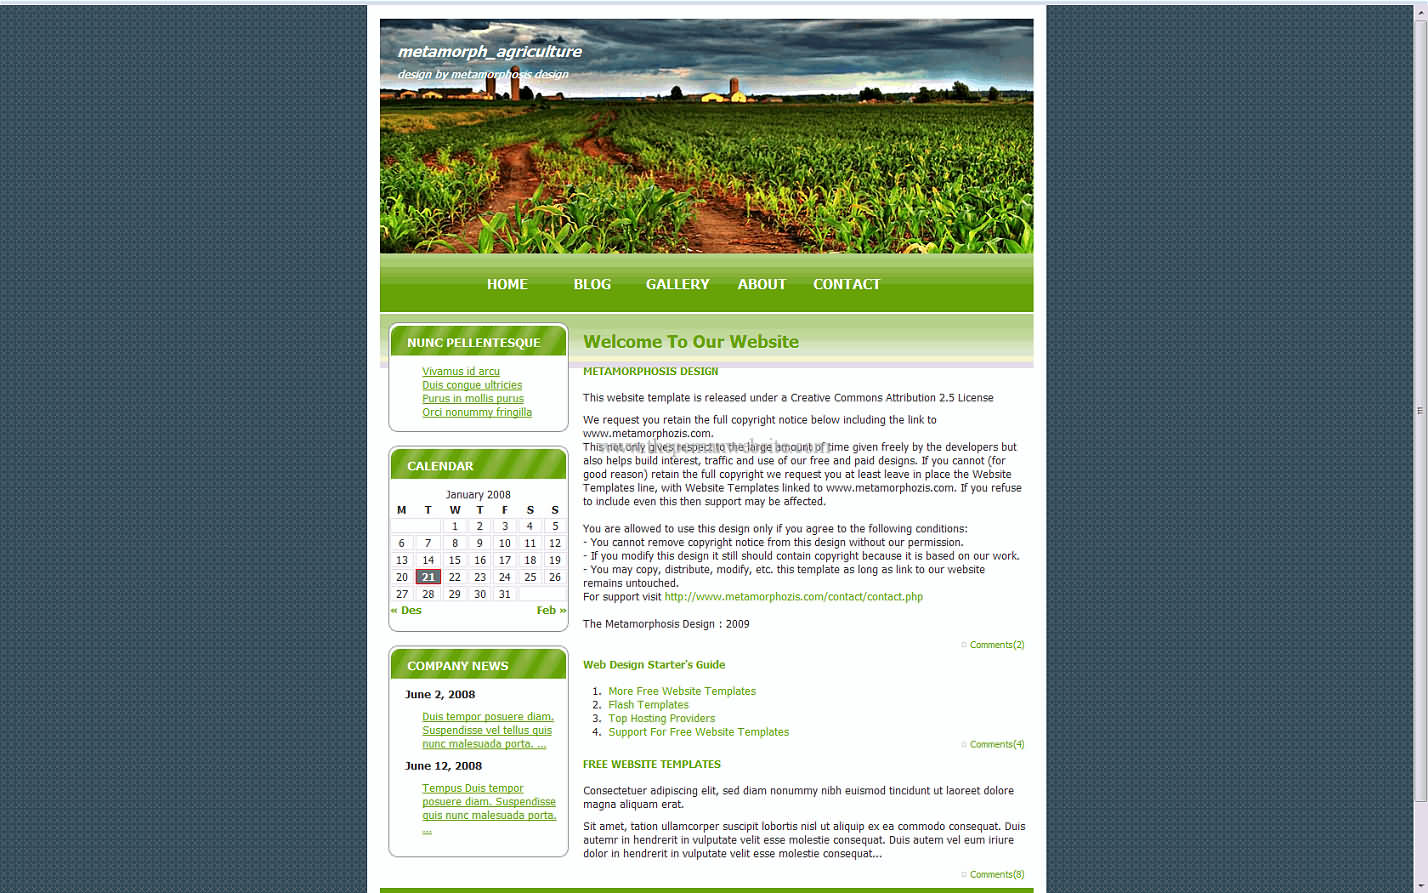 Metamorph Agriculture css template